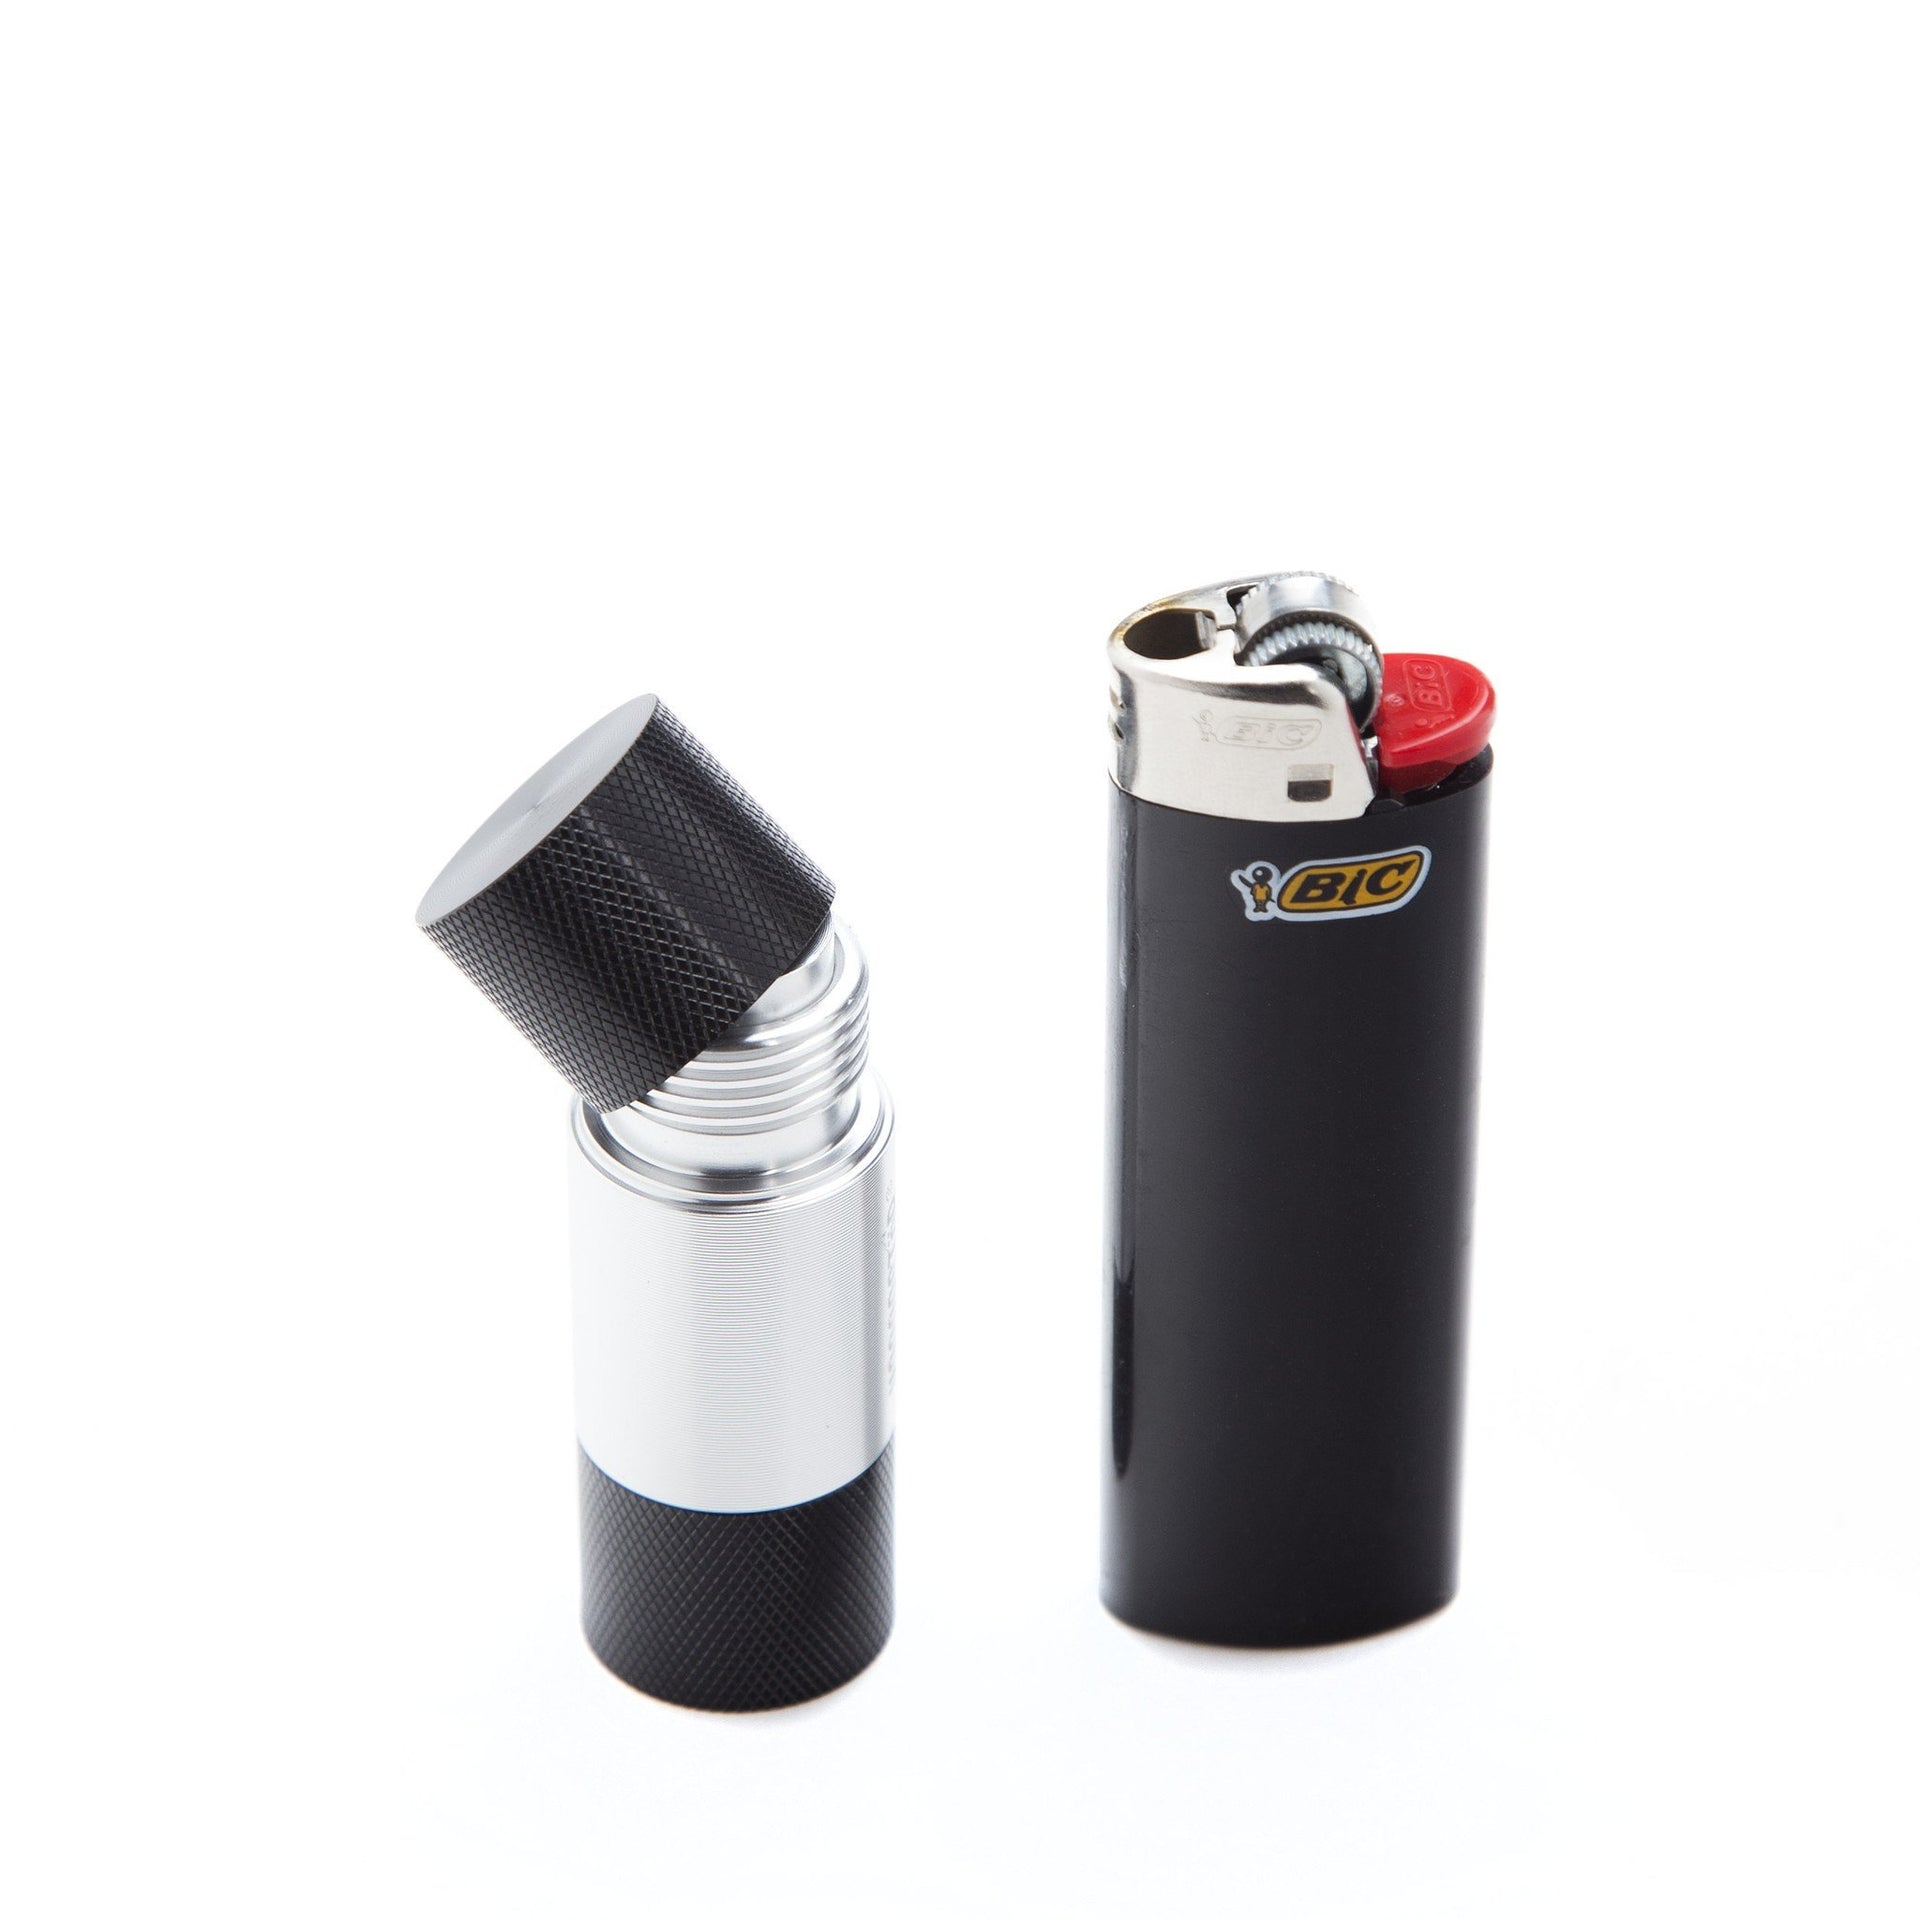 Kannastor - 14mm Press - 420 Science - The most trusted online smoke shop.